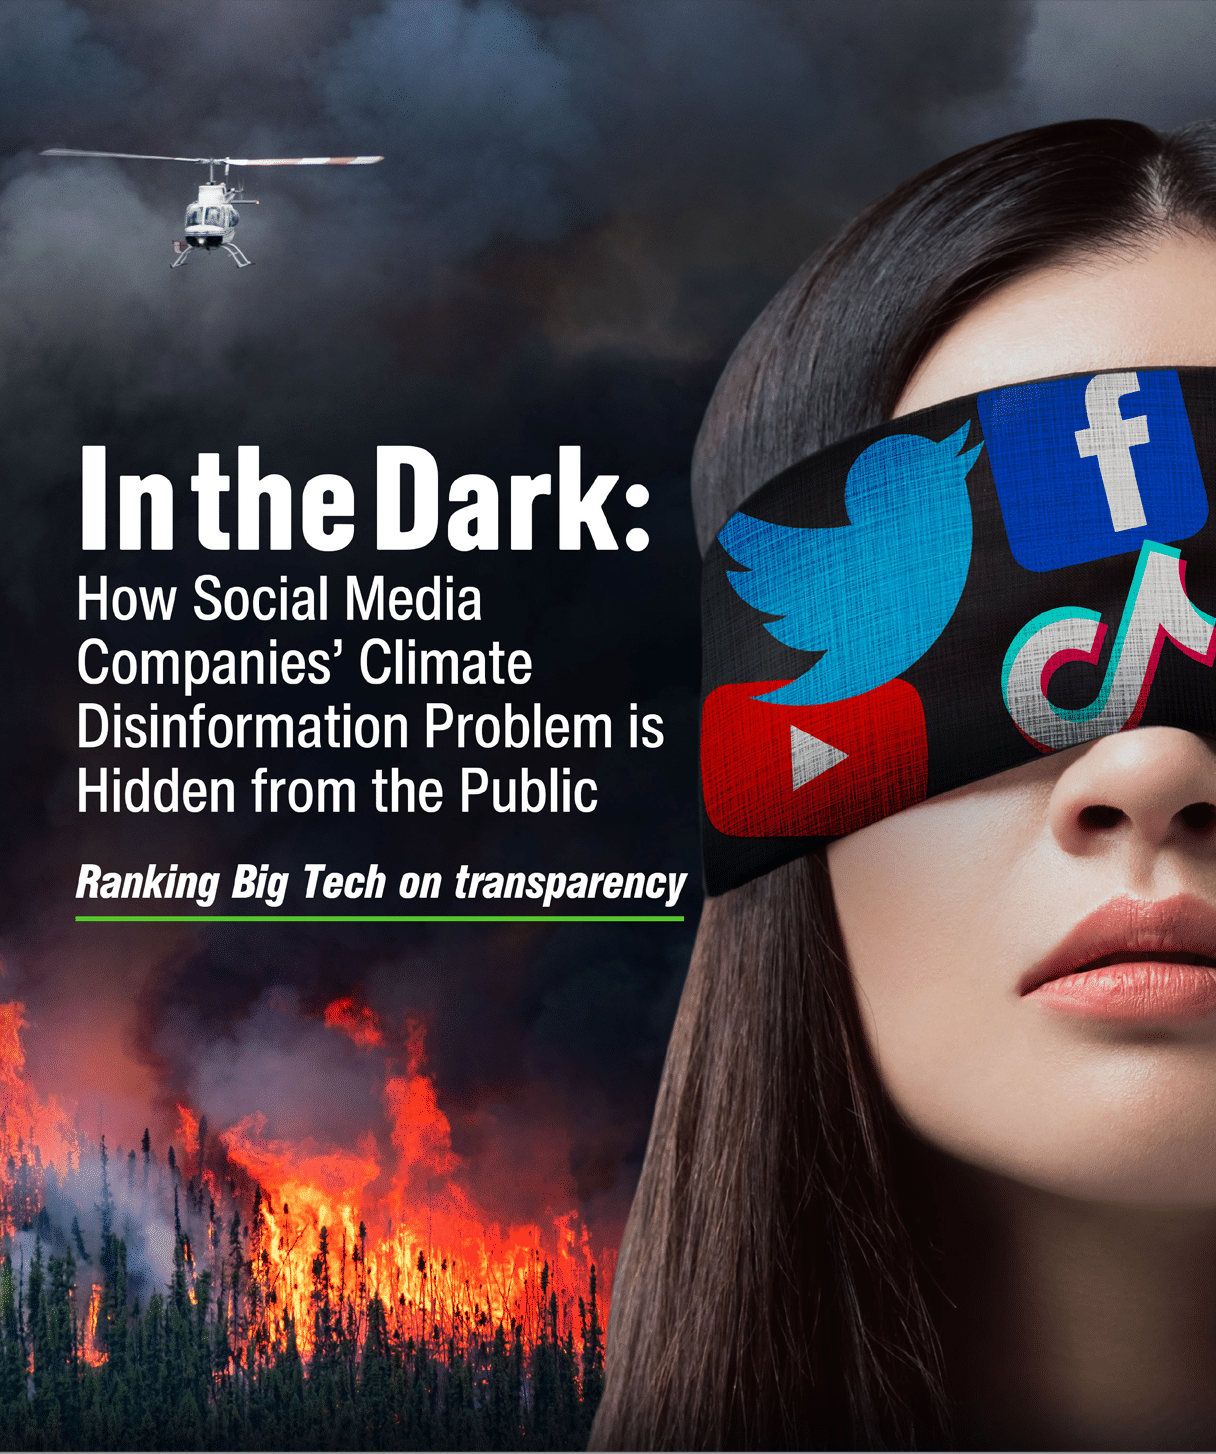 In the Dark: How social media companies’ climate disinformation problem is hidden from the public